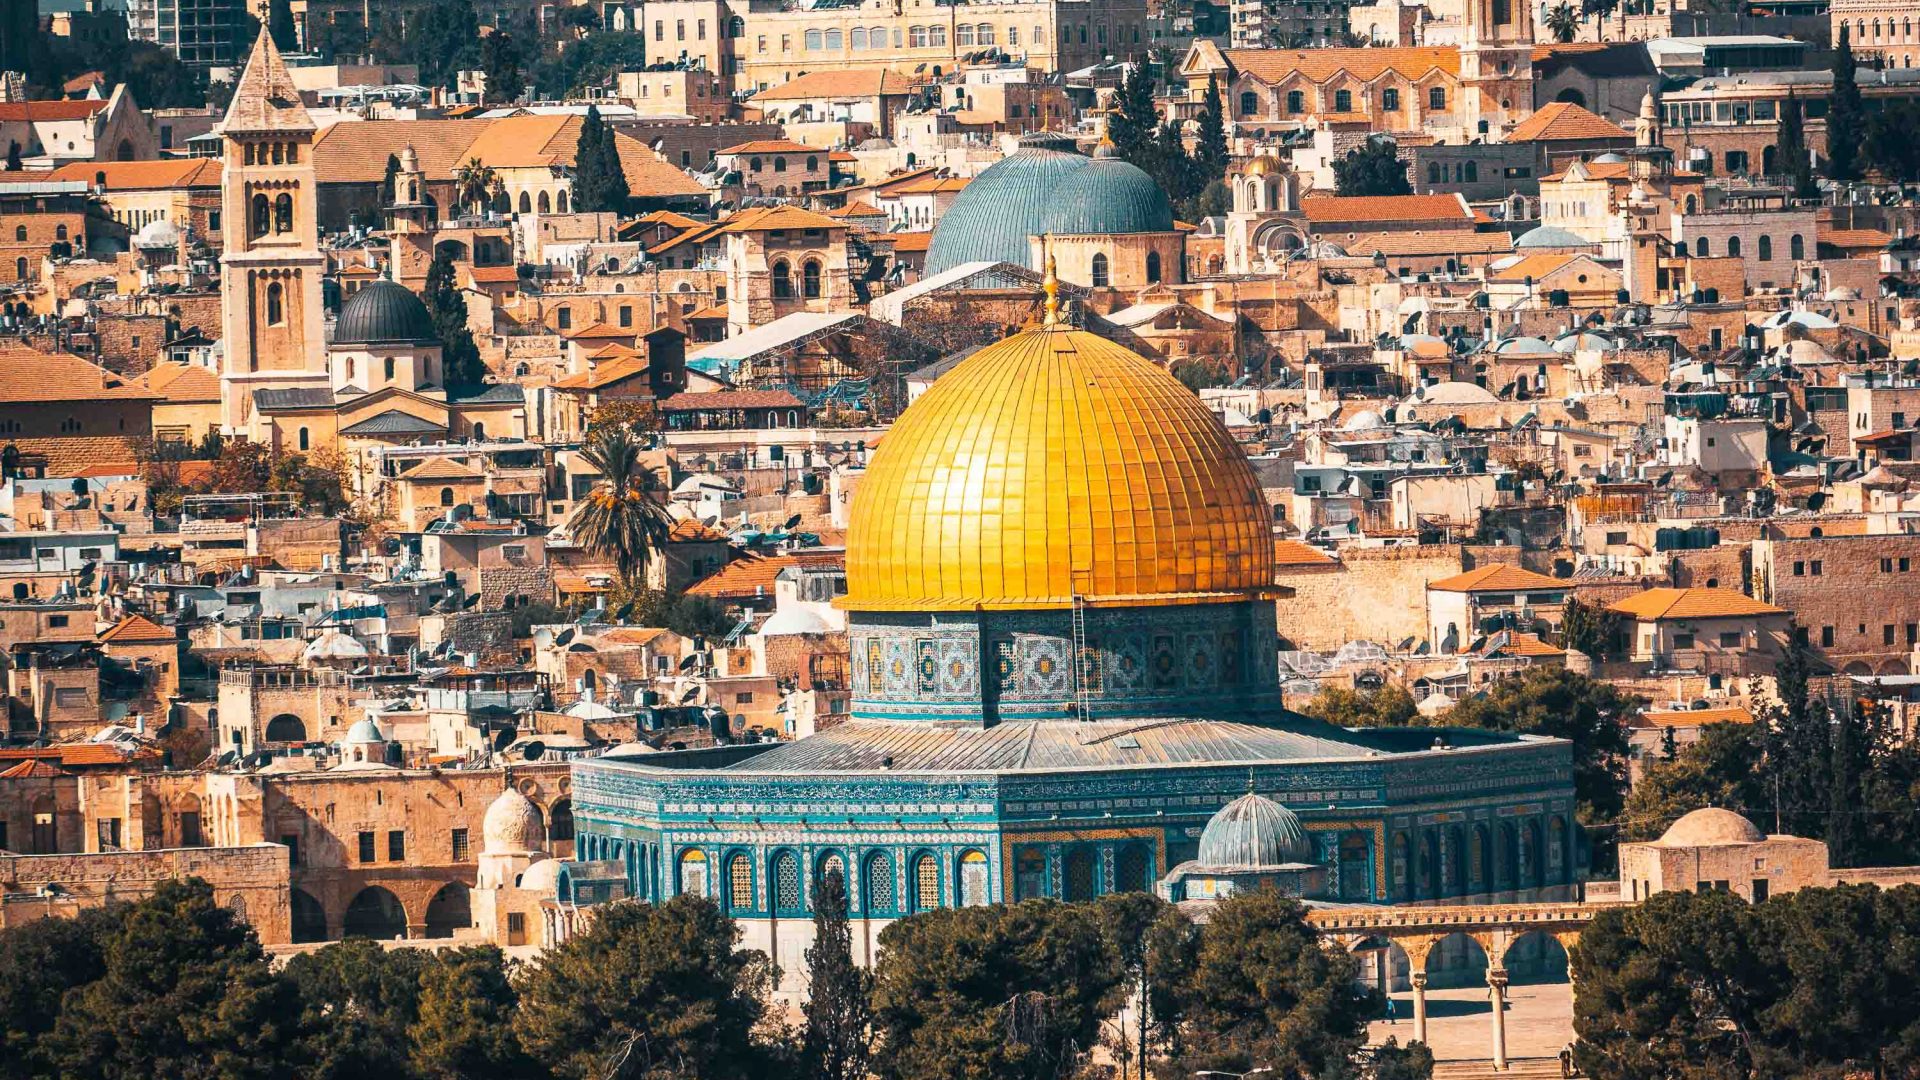 The city of Jerusalem with the golden dome of the Rock Mosque.